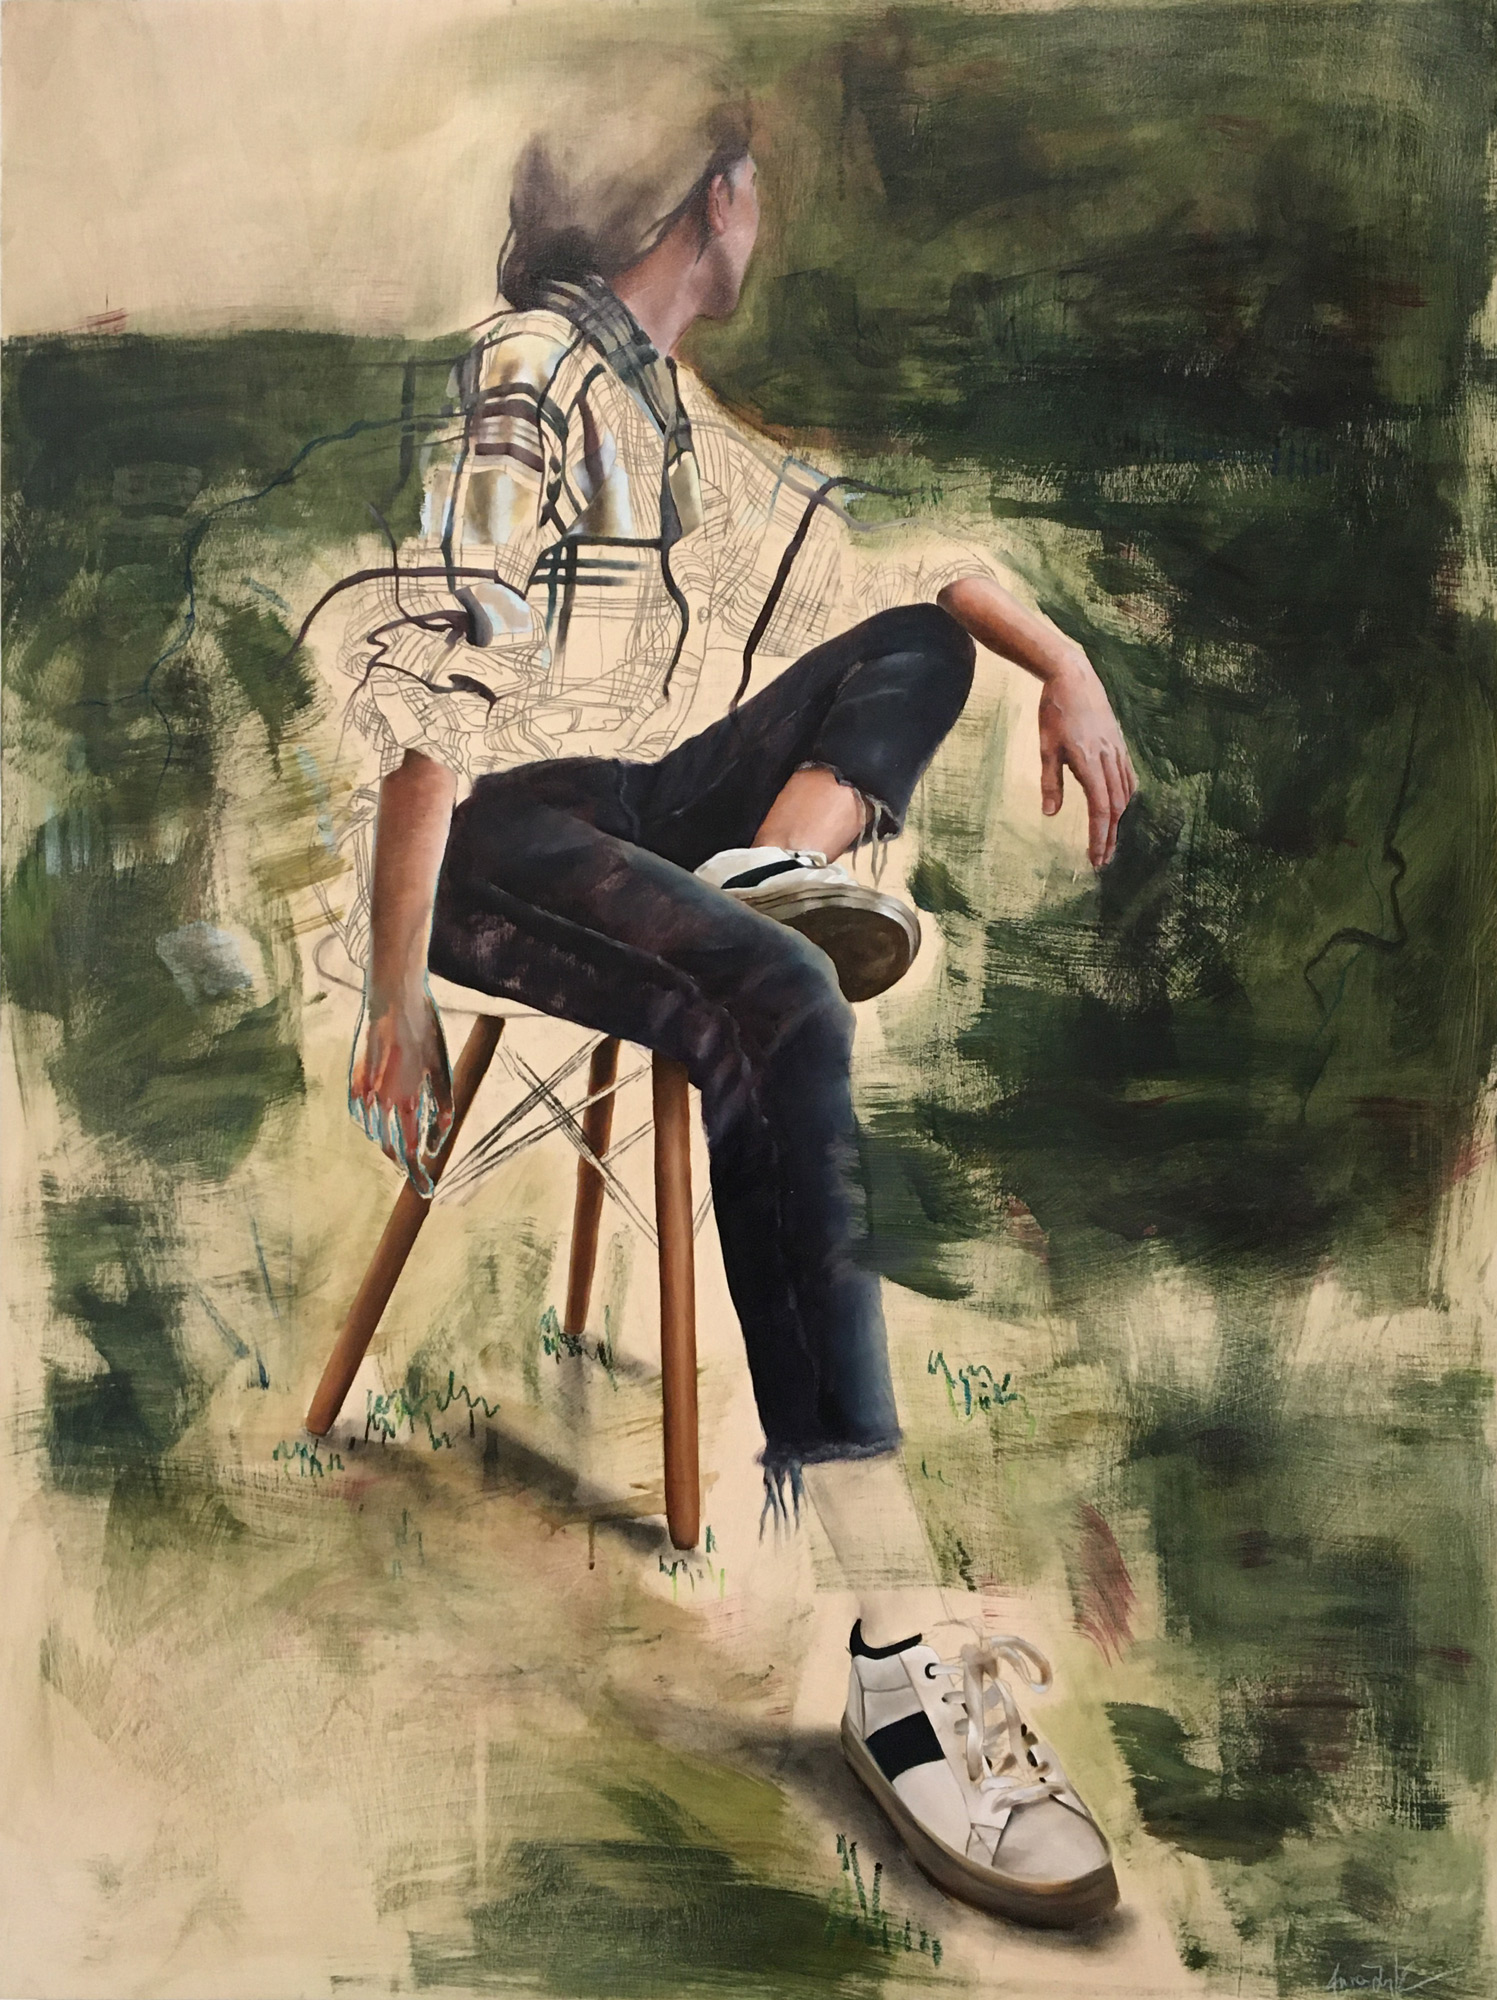 Painting of a person sitting on a chair in a field